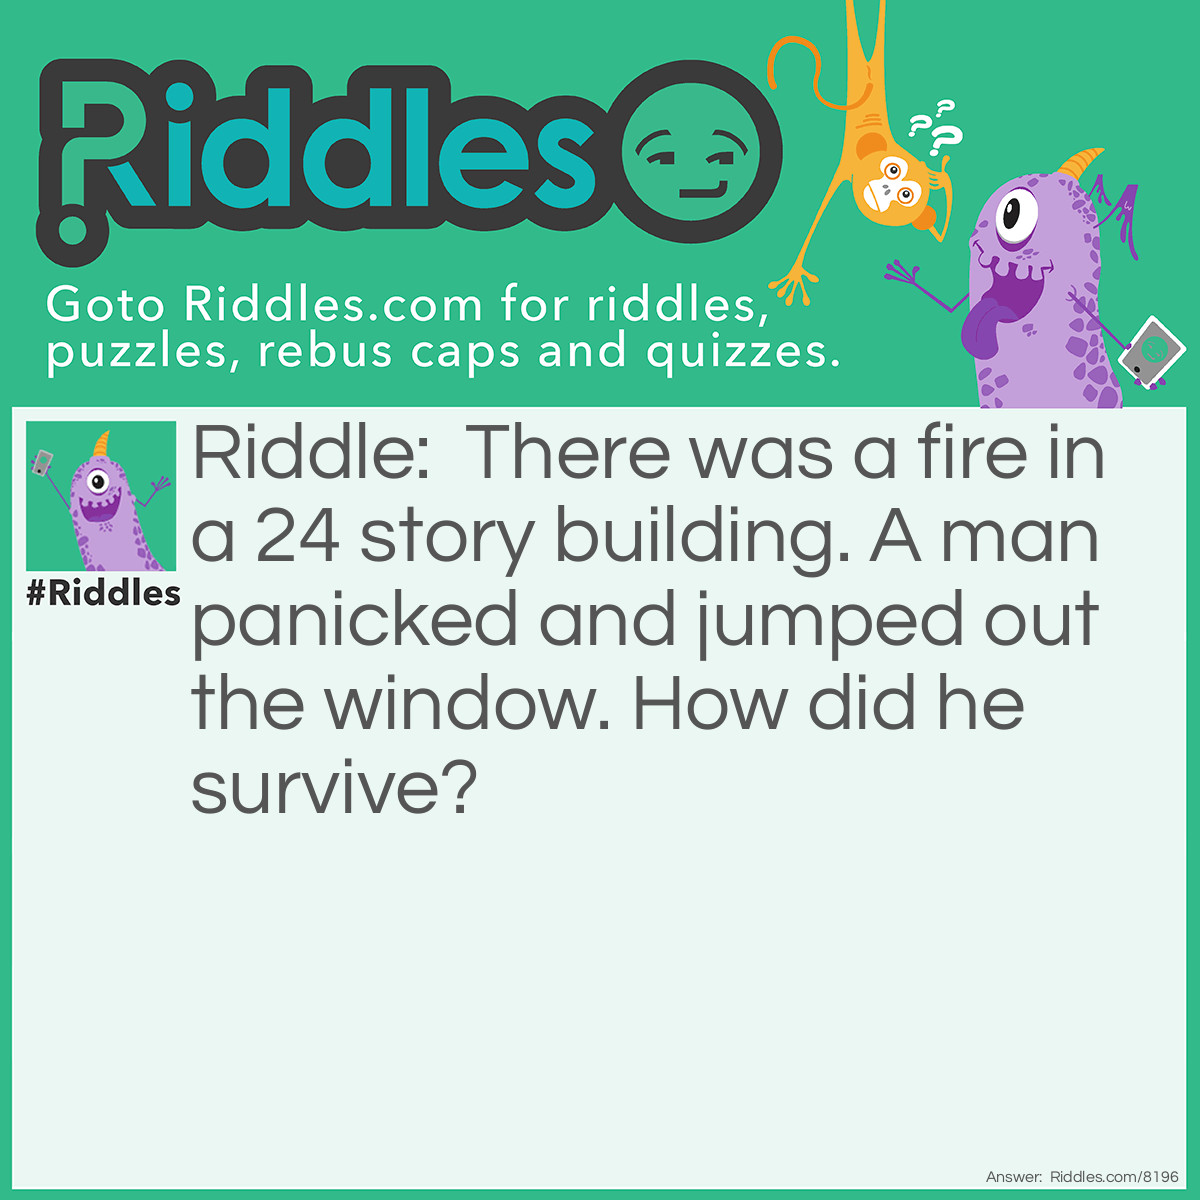 Riddle: There was a fire in a 24 story building. A man panicked and jumped out the window. How did he survive? Answer: He jumped out the first floor window.